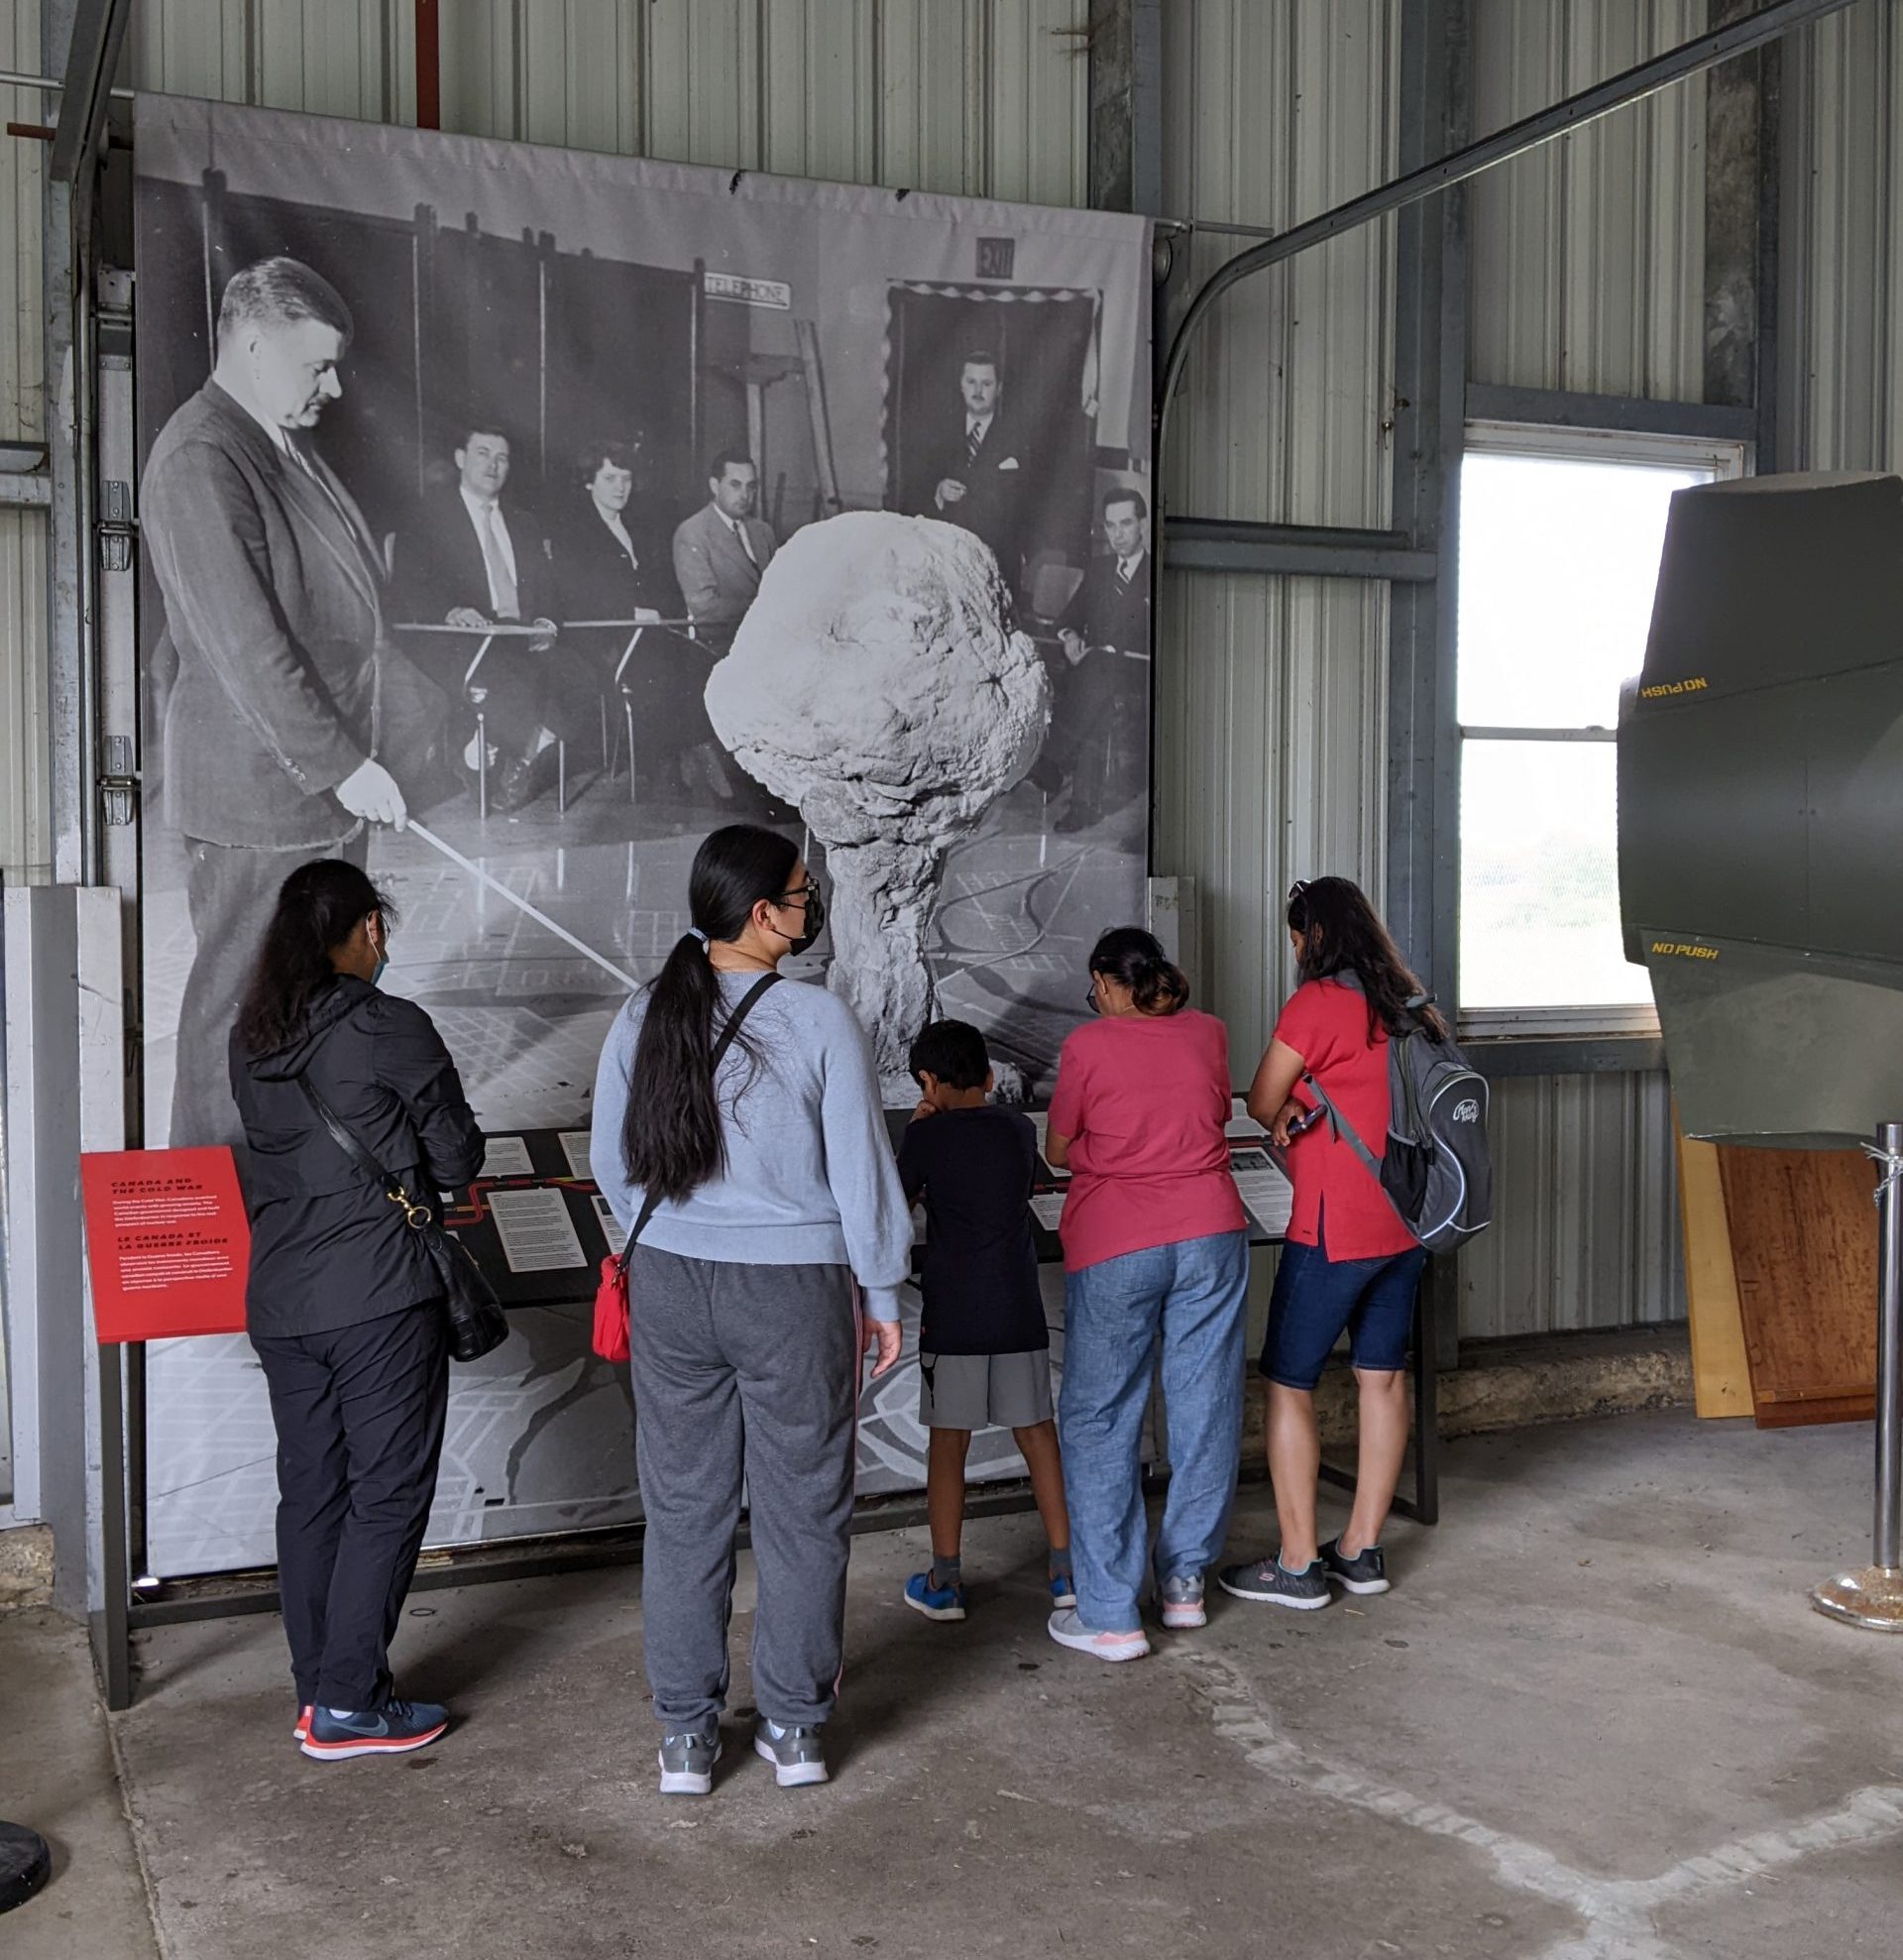 Visitors look at a Cold War display in the entrance to the Diefenbunker.